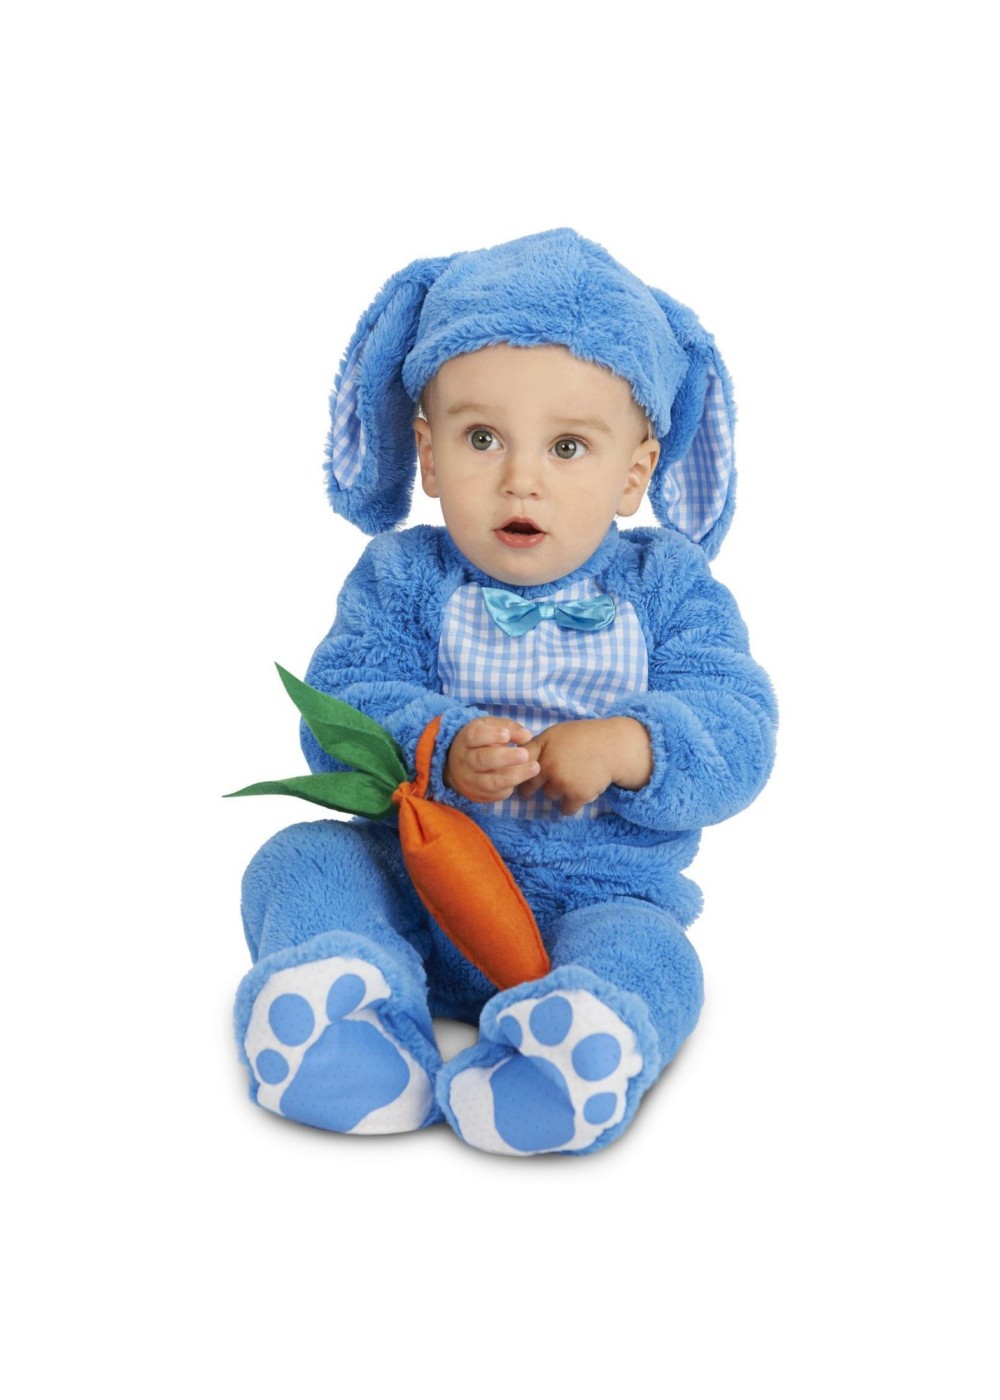 Bunny Outfits Toddler Baby Baby Easter Bunny Outfit Factory Sale Lovely Inf...